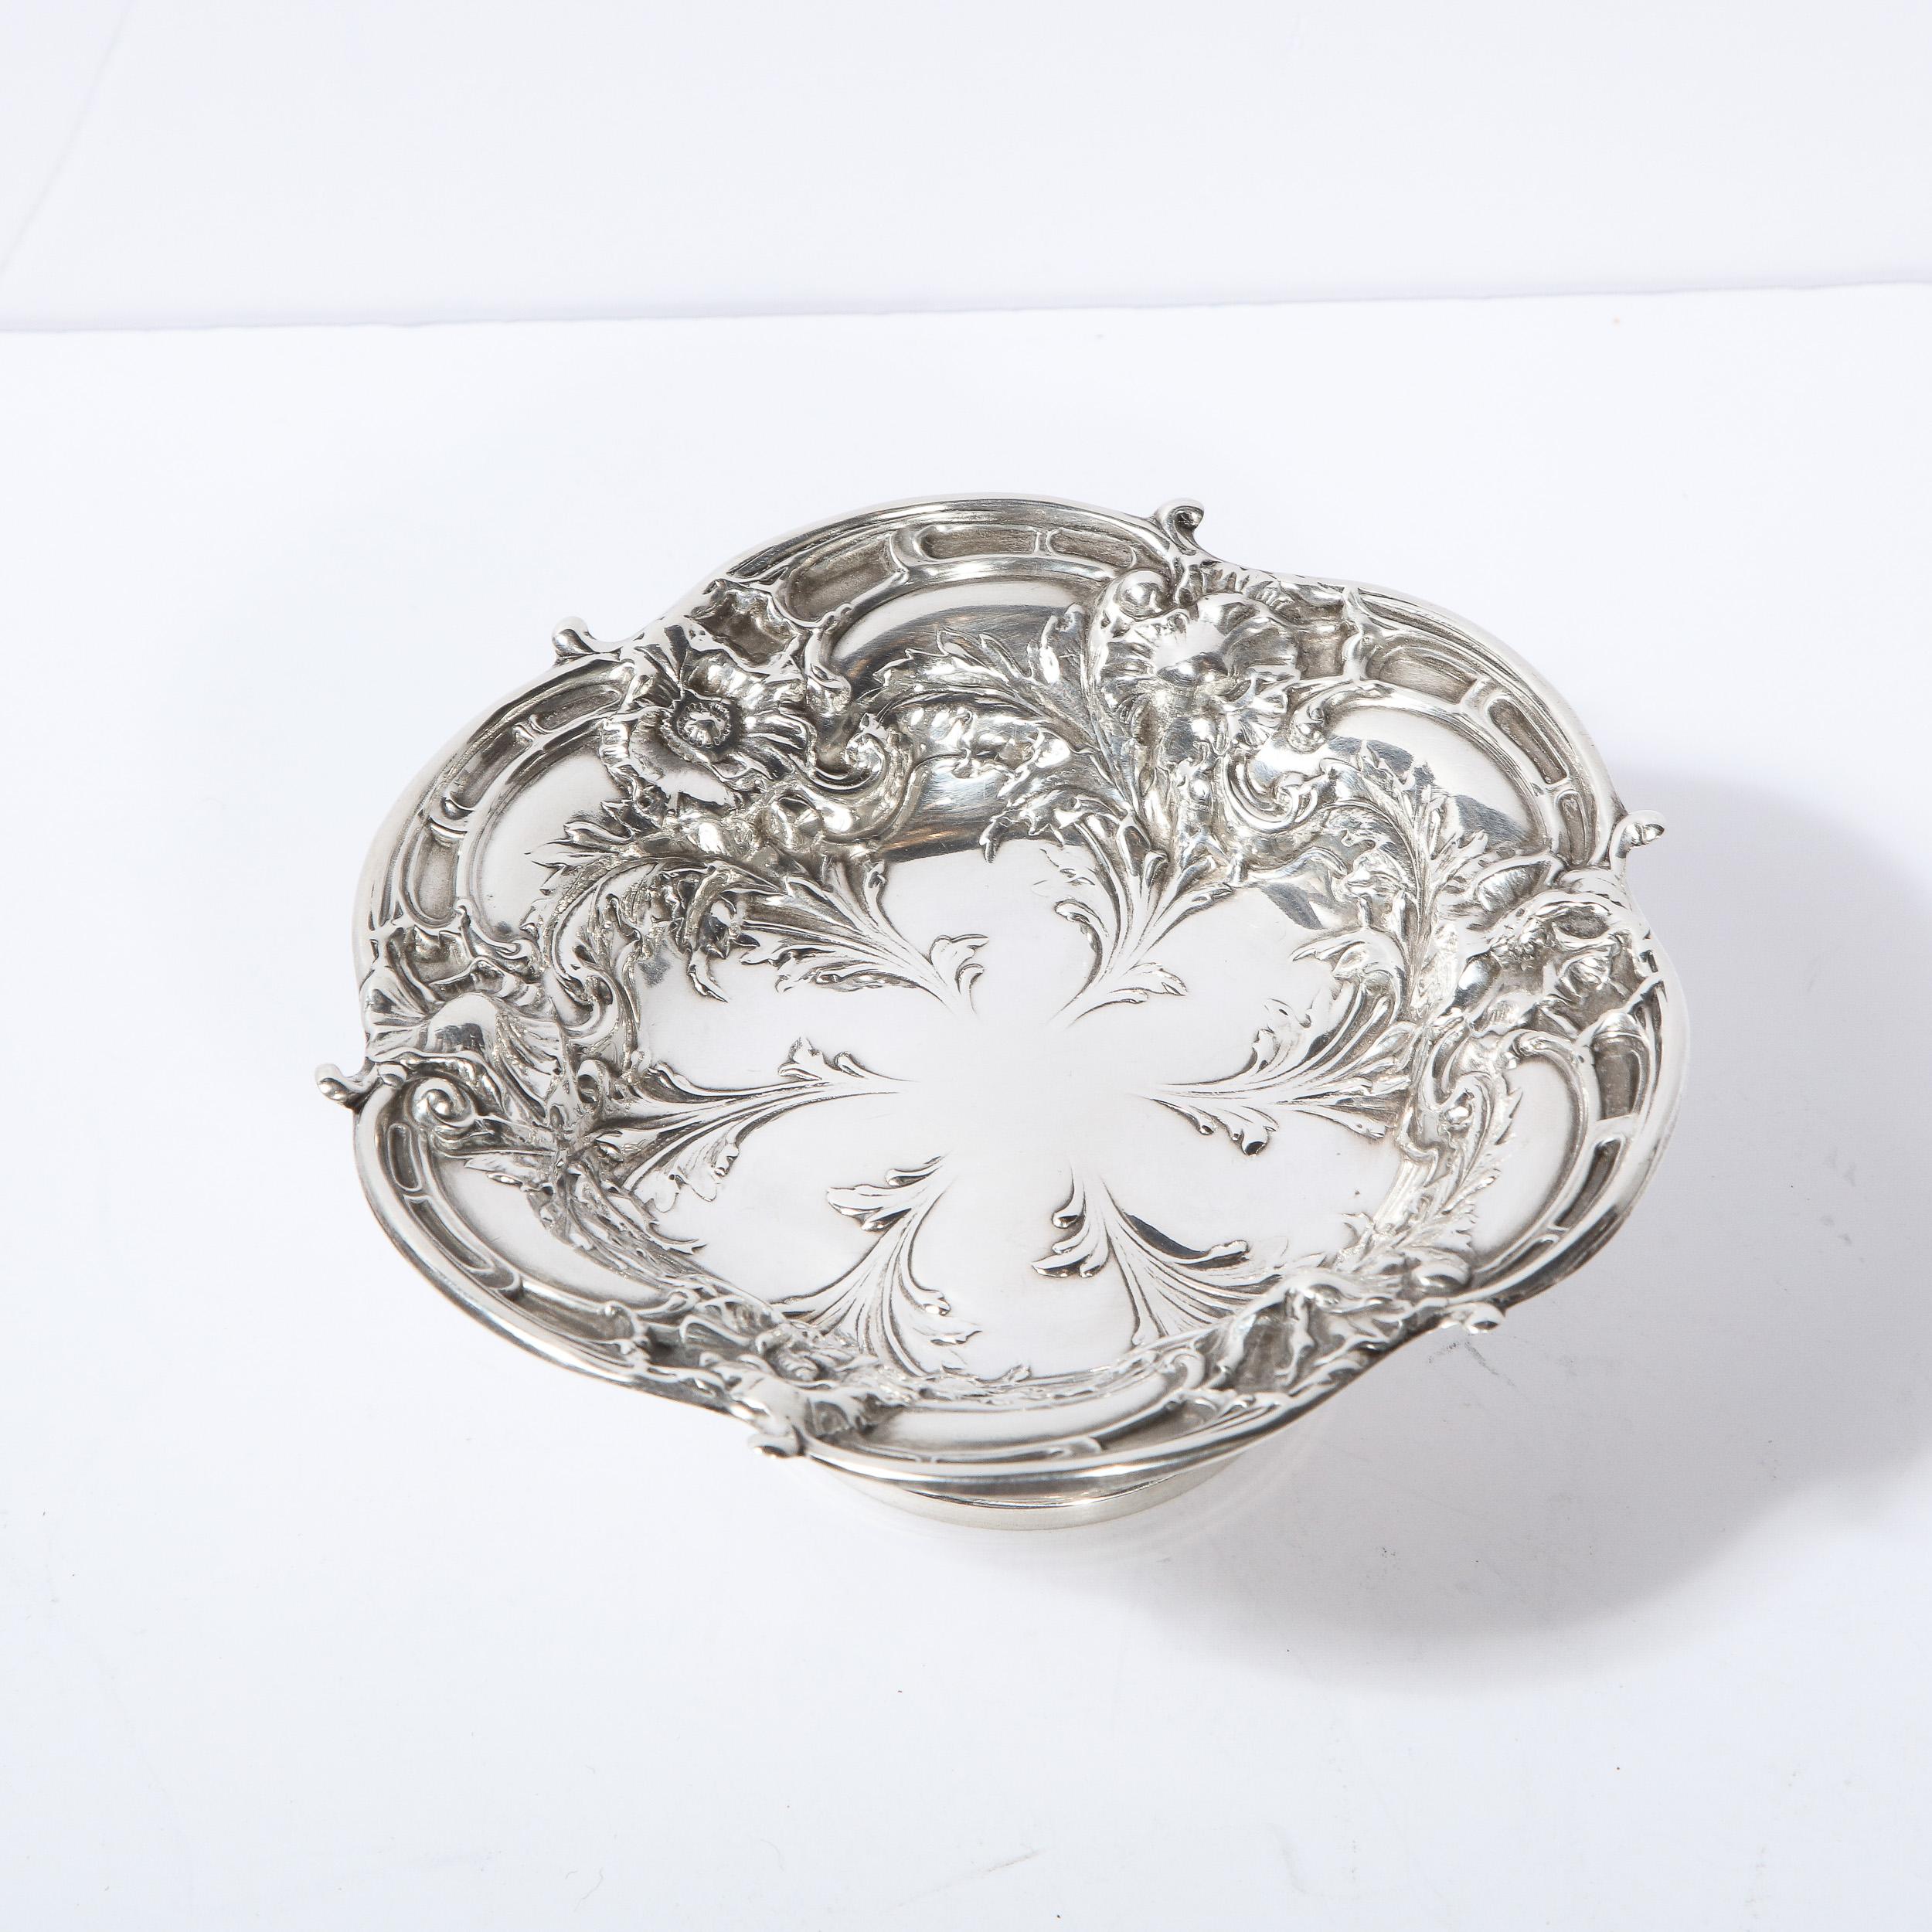 20th Century Neoclassical Style Sterling Silver Tazza with Foliate Motifs by Reed and Barton For Sale